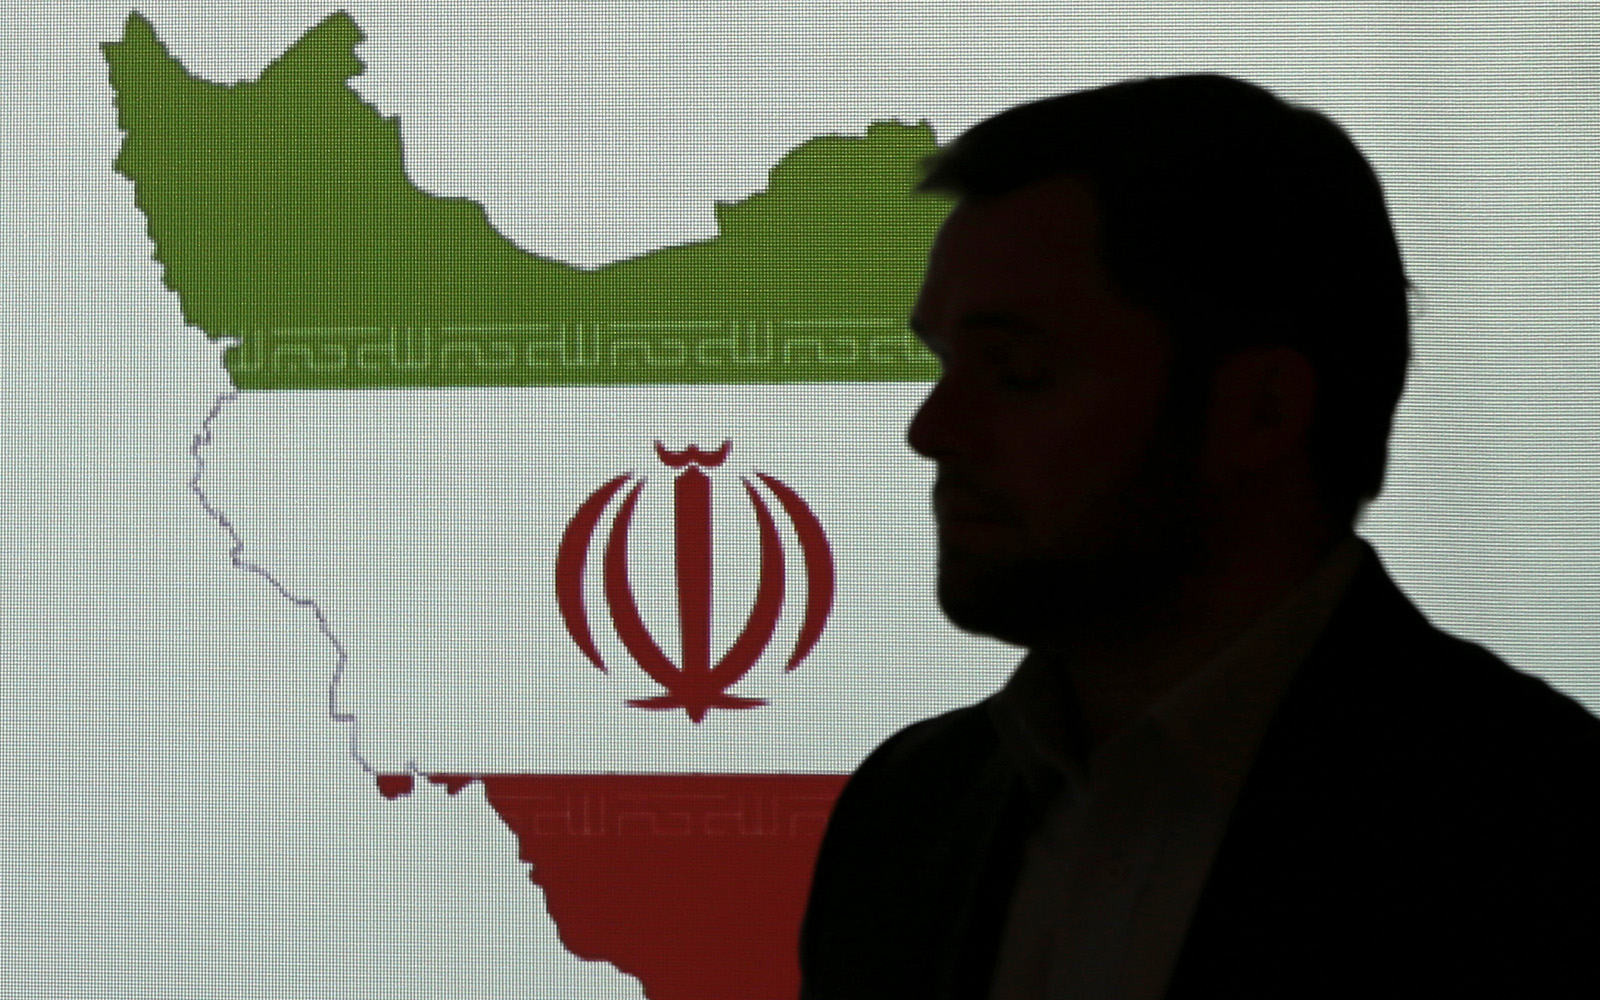 Iran uses web server operating from Netherland to spy on dissidents